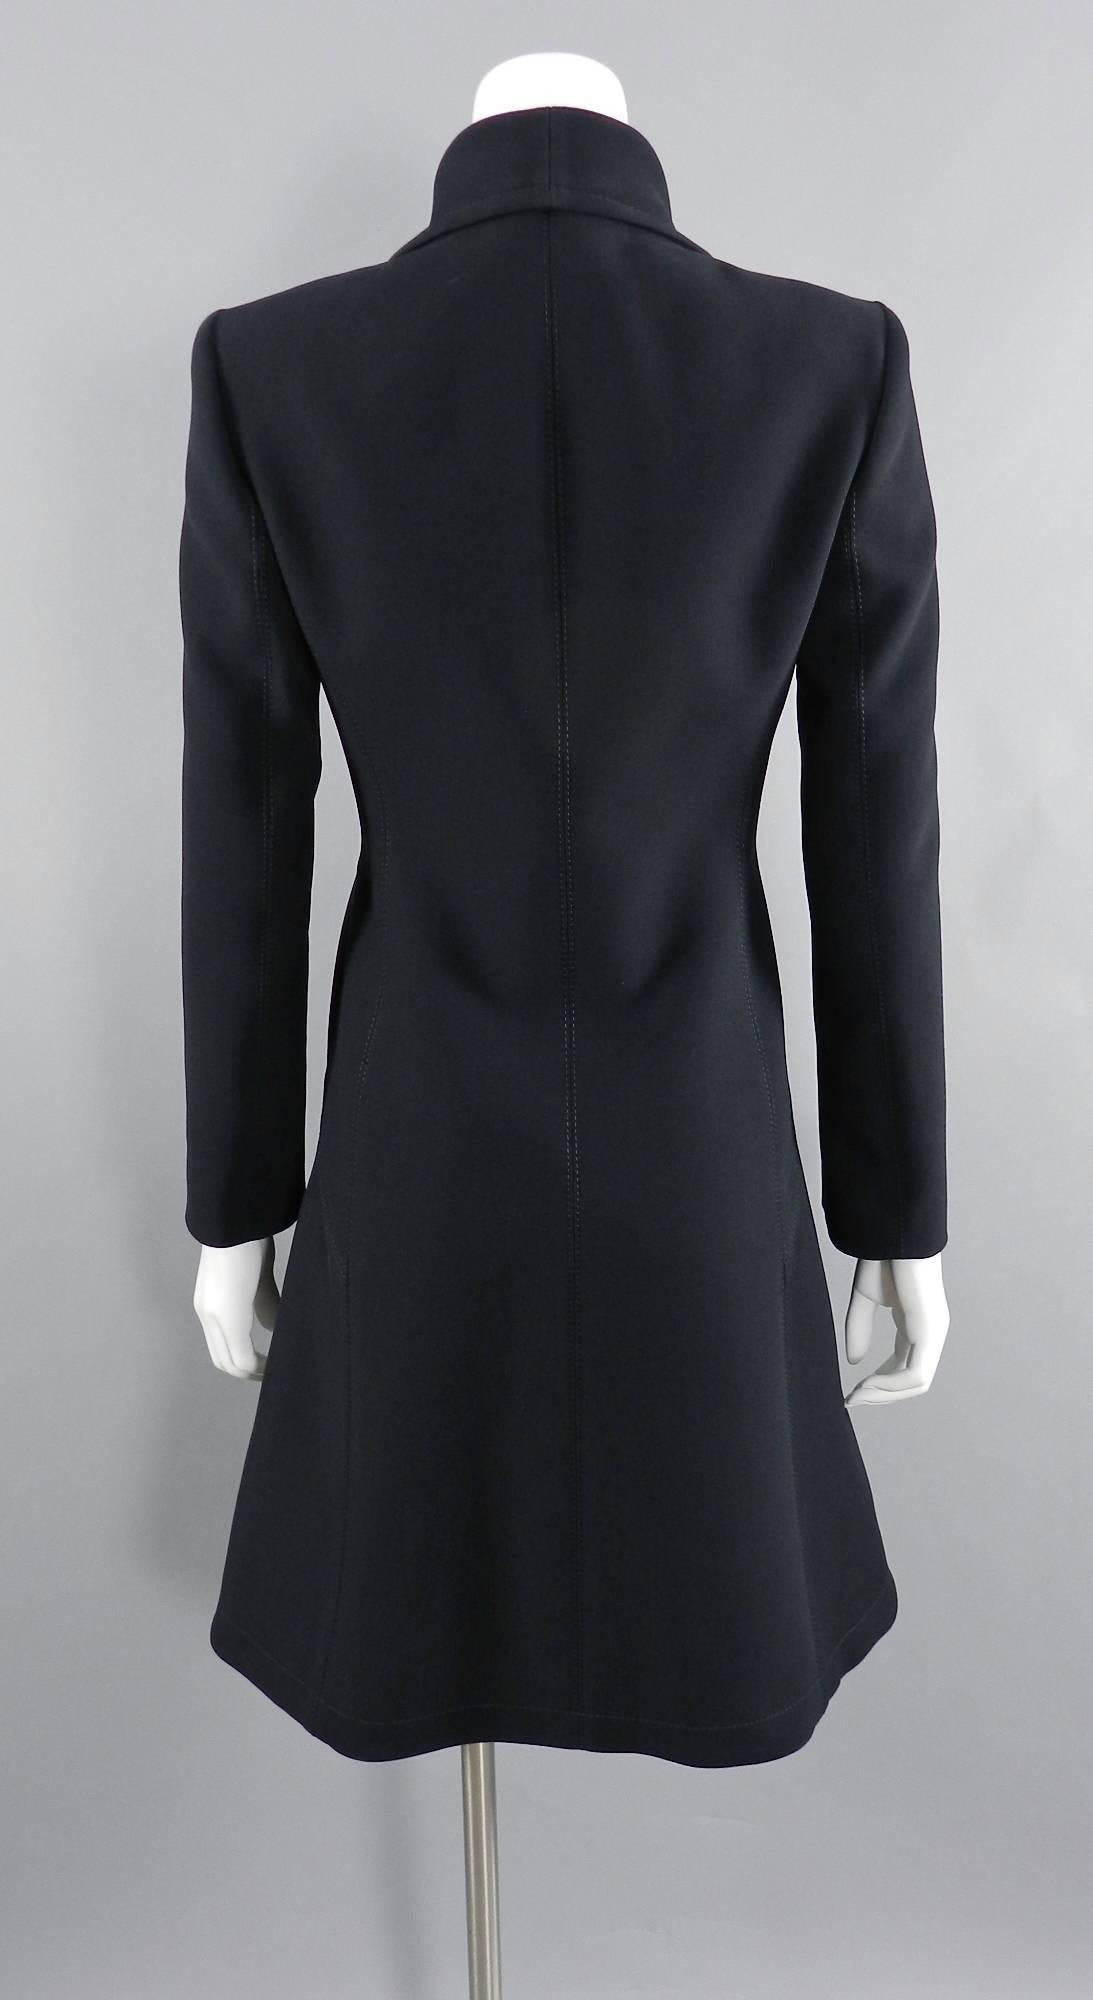 Gucci pre-fall 2014 Black Dress coat with Silver Buttons 1